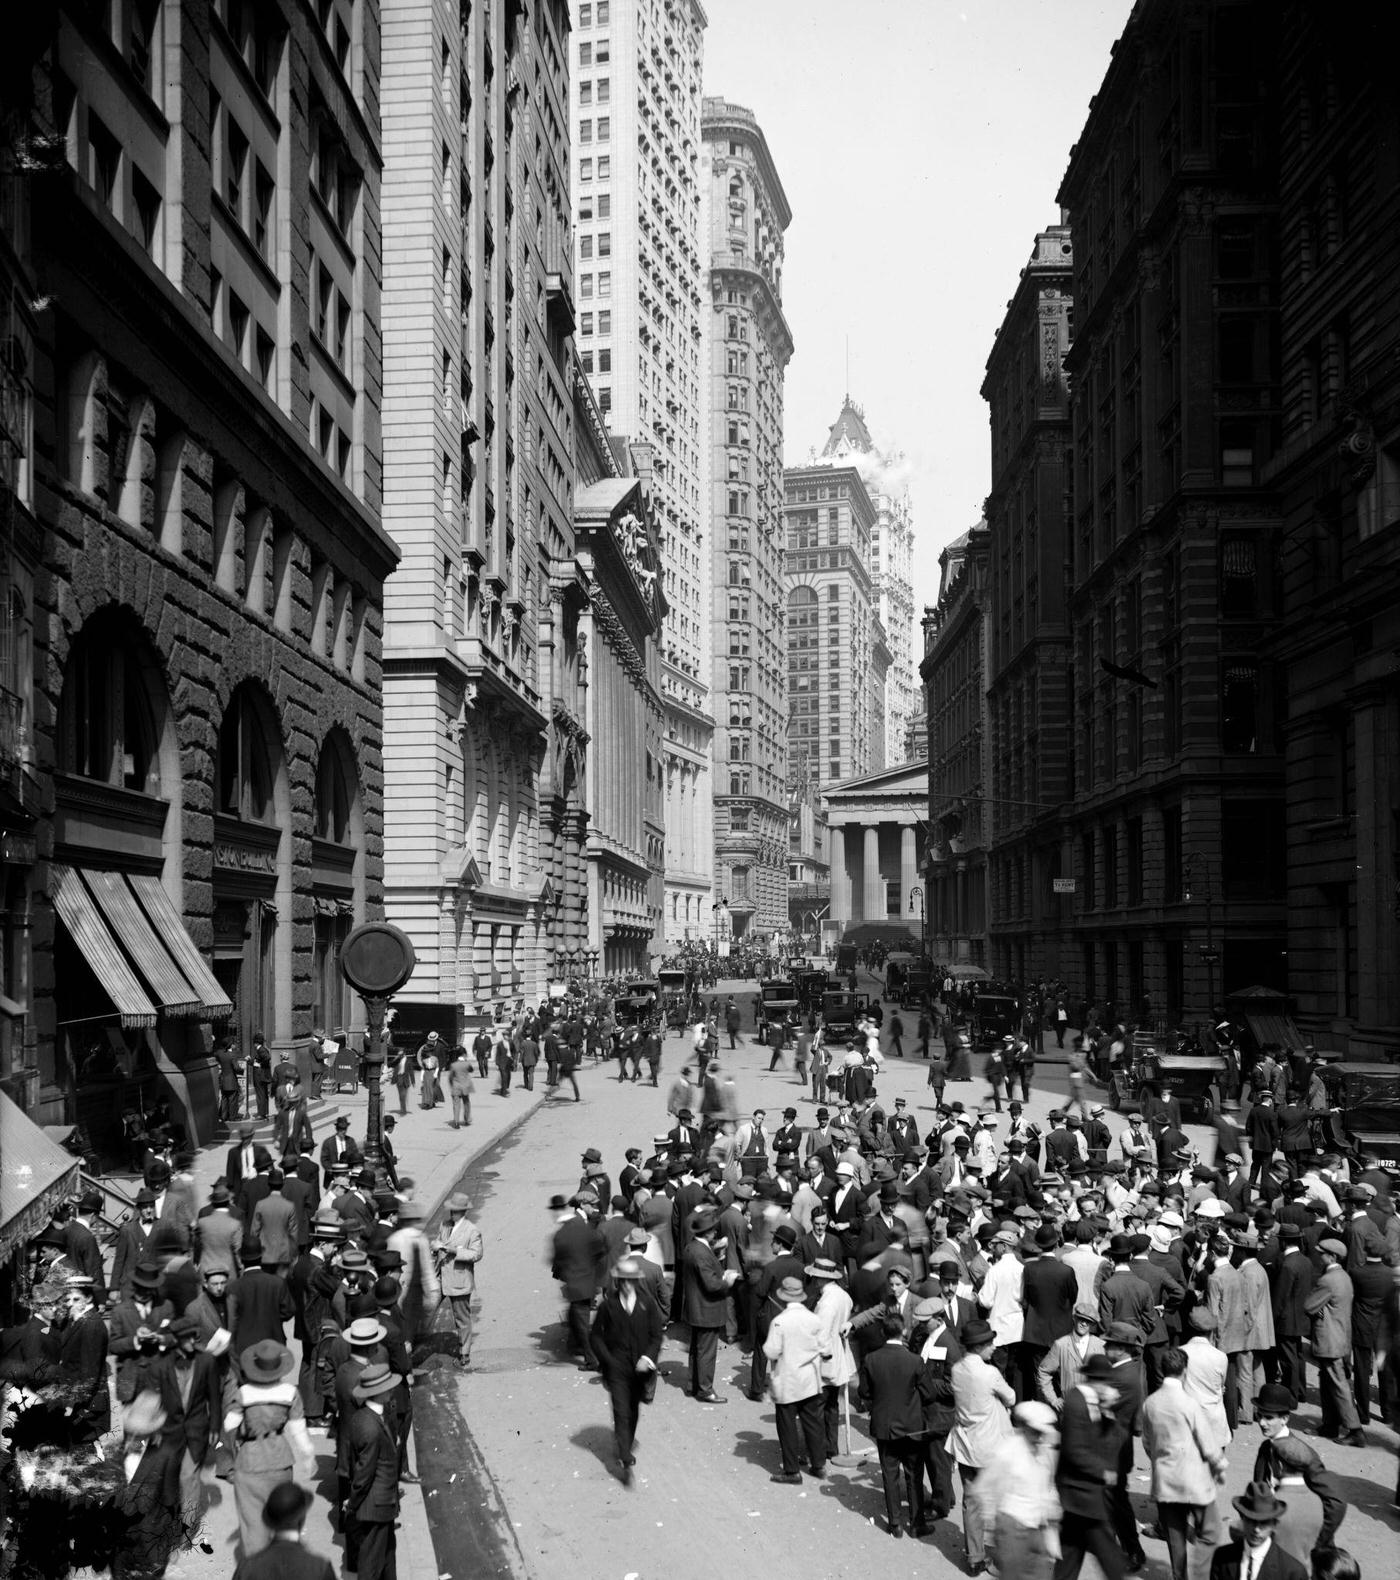 Curb Brokers Or Curbstone Brokers Trading On The Street Near Broad Street And Wall Street, 1915